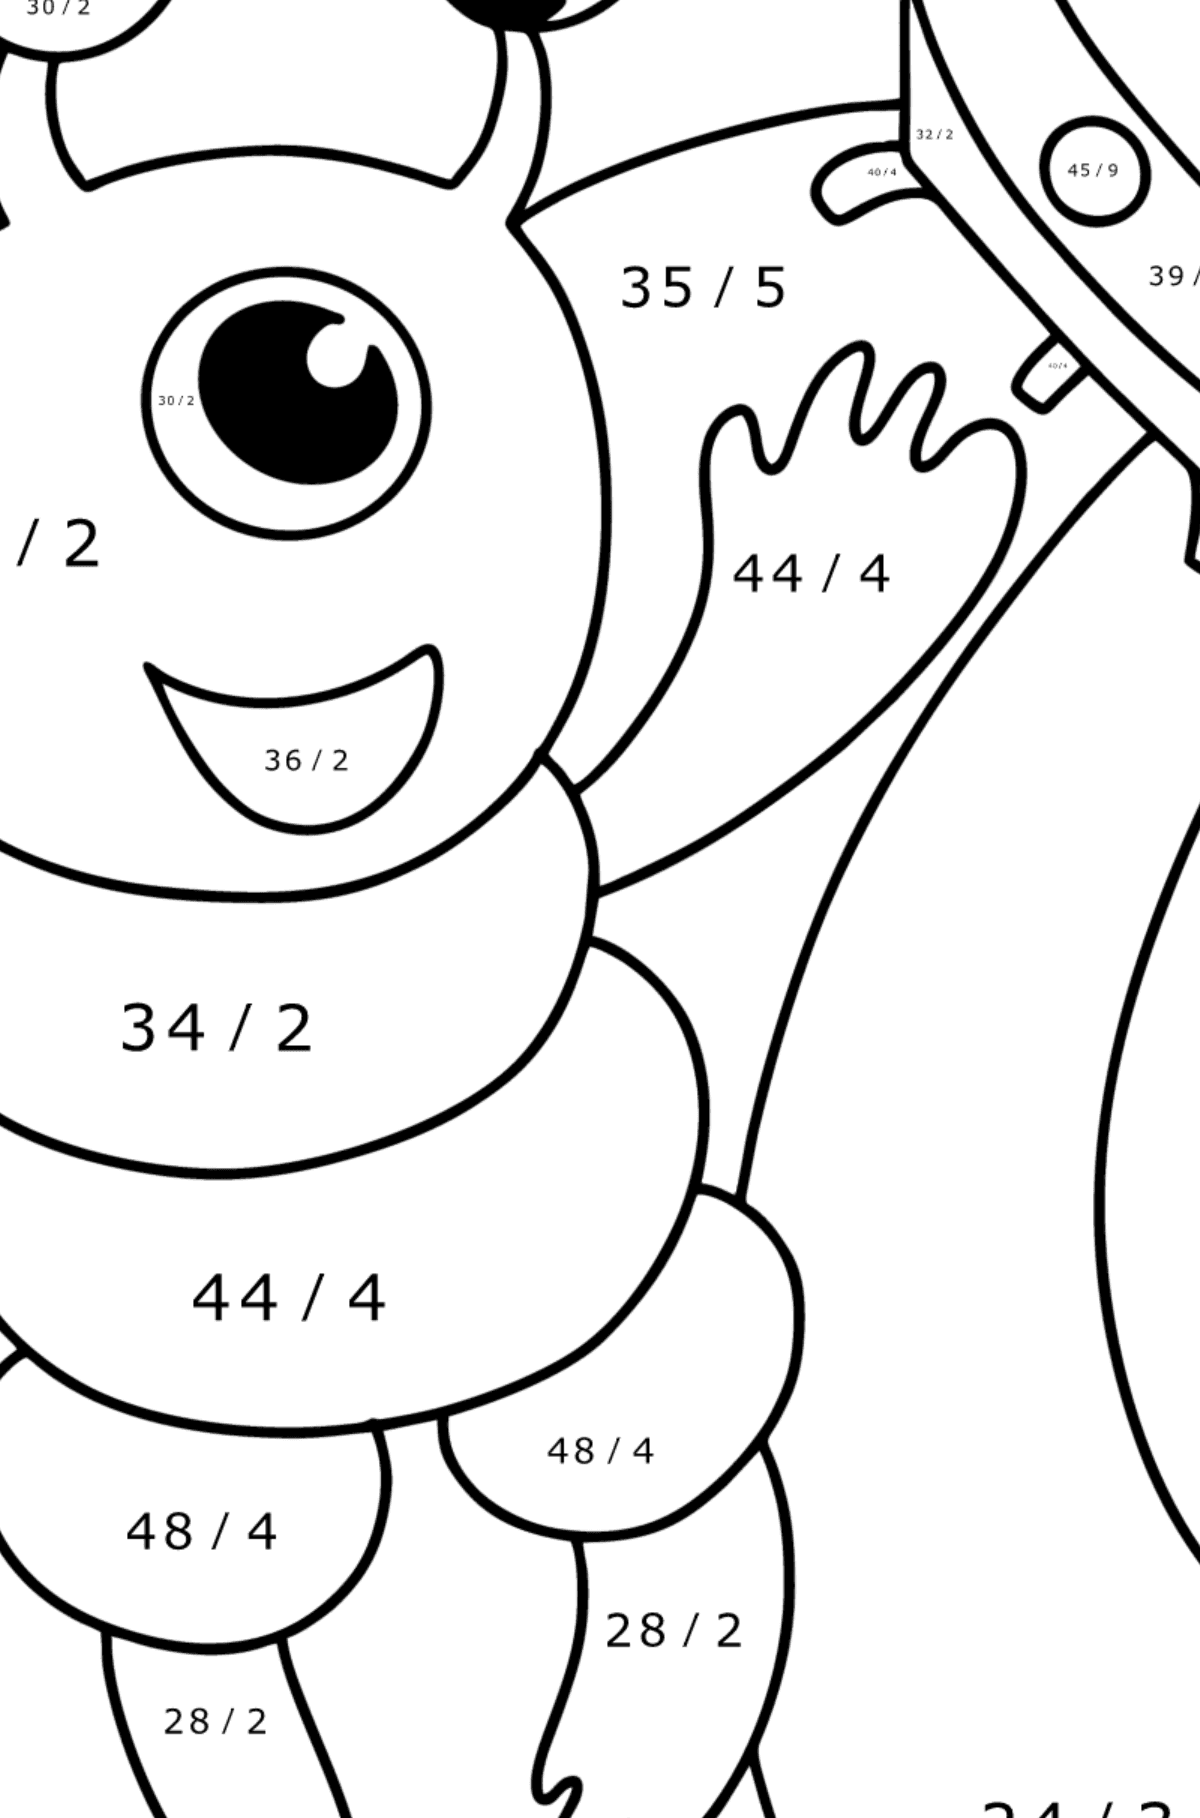 Alien in space coloring page - Math Coloring - Division for Kids